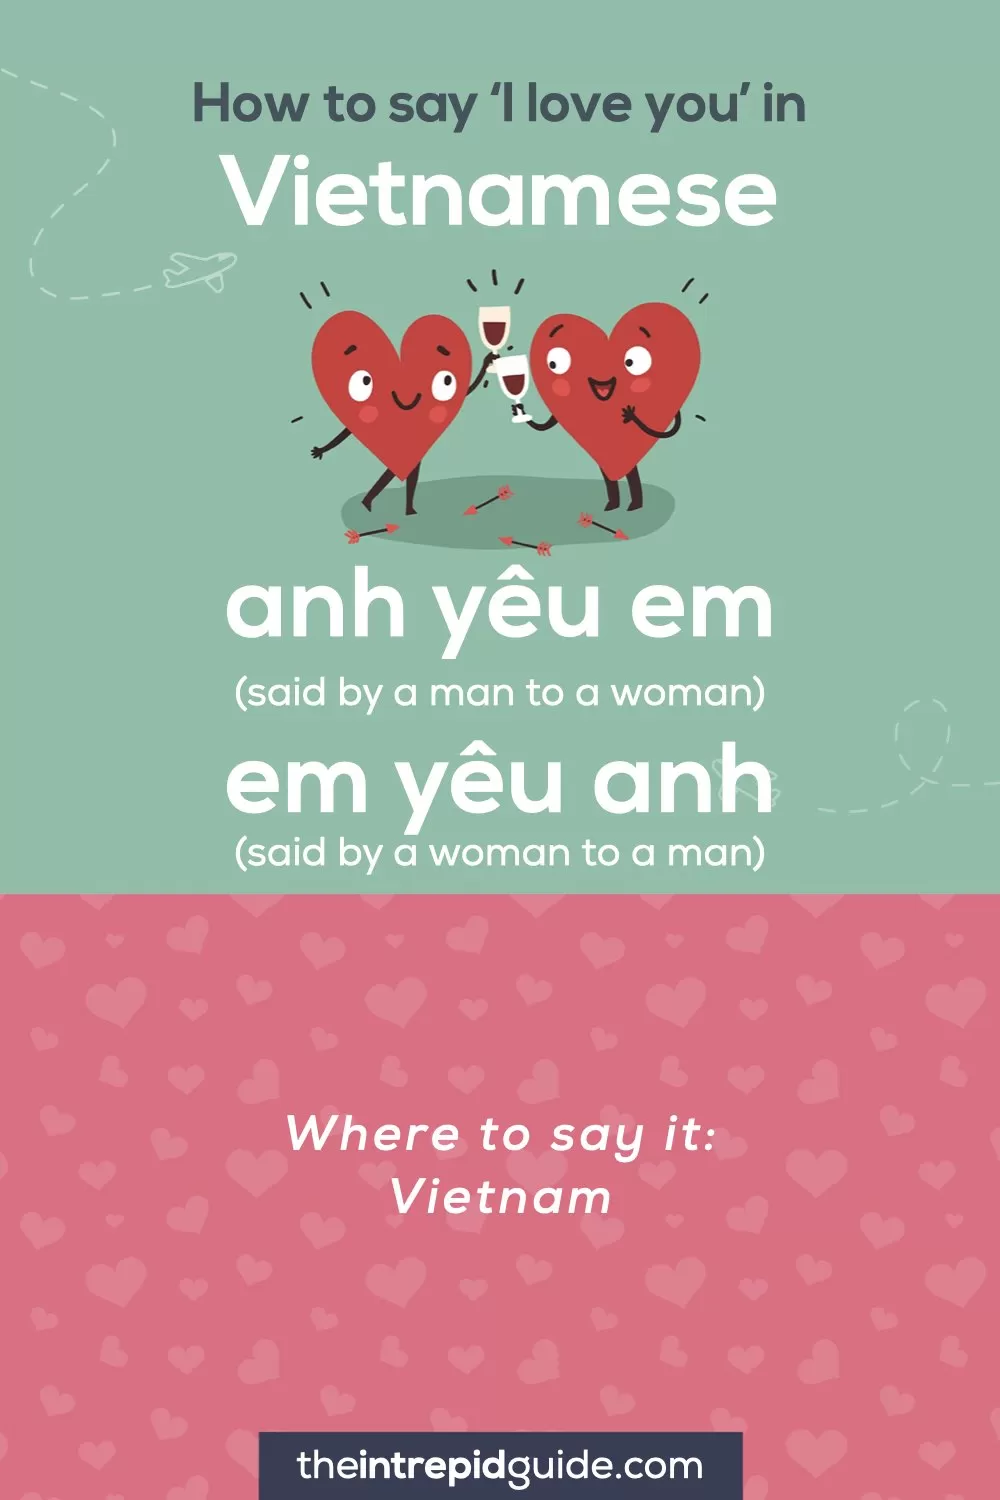 How to say I love you in different languages - Vietnamese - anh yêu em (a man to a woman), em yêu anh (a woman to a man)